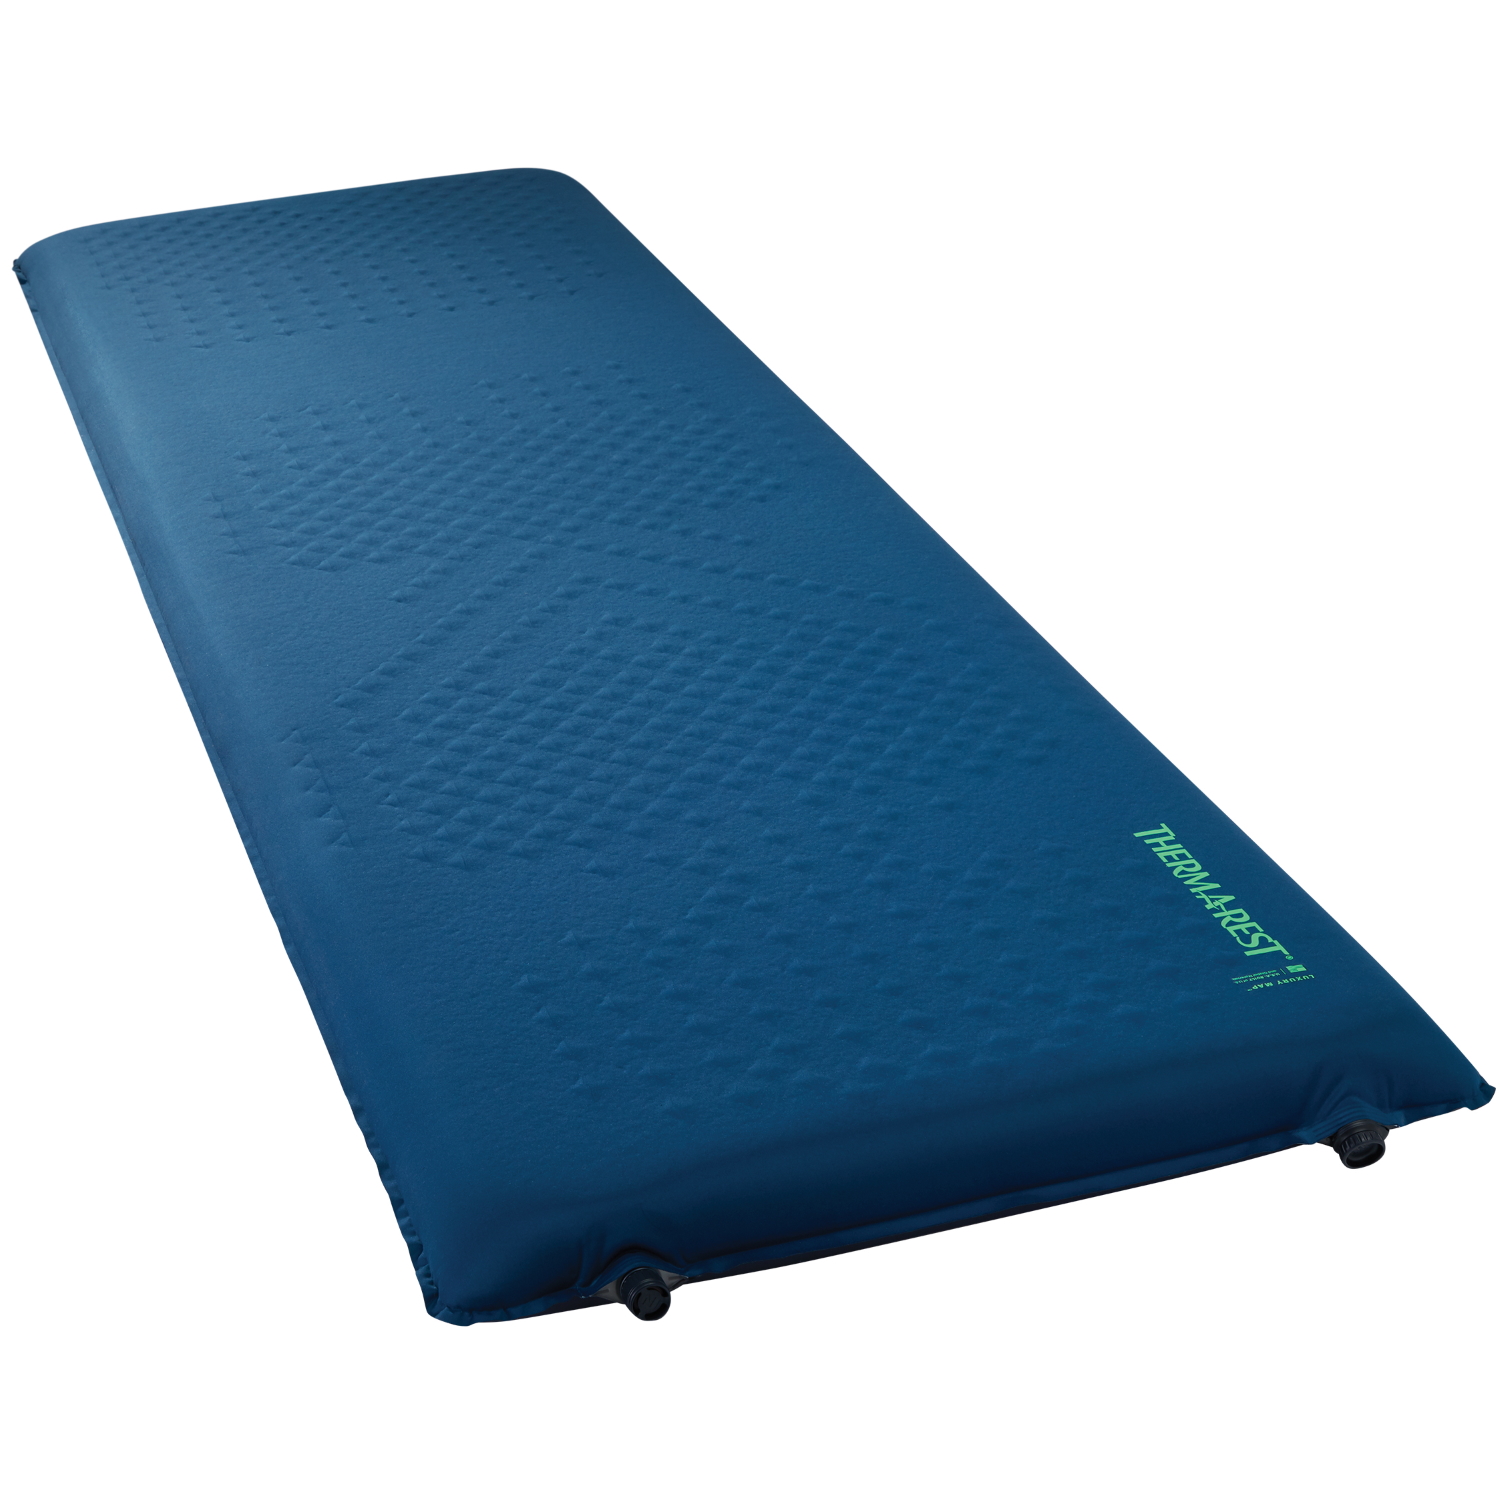 Picture of Therm-a-Rest Luxury Map Mattress Sleeping Pad - XLarge - Poseidon Blue